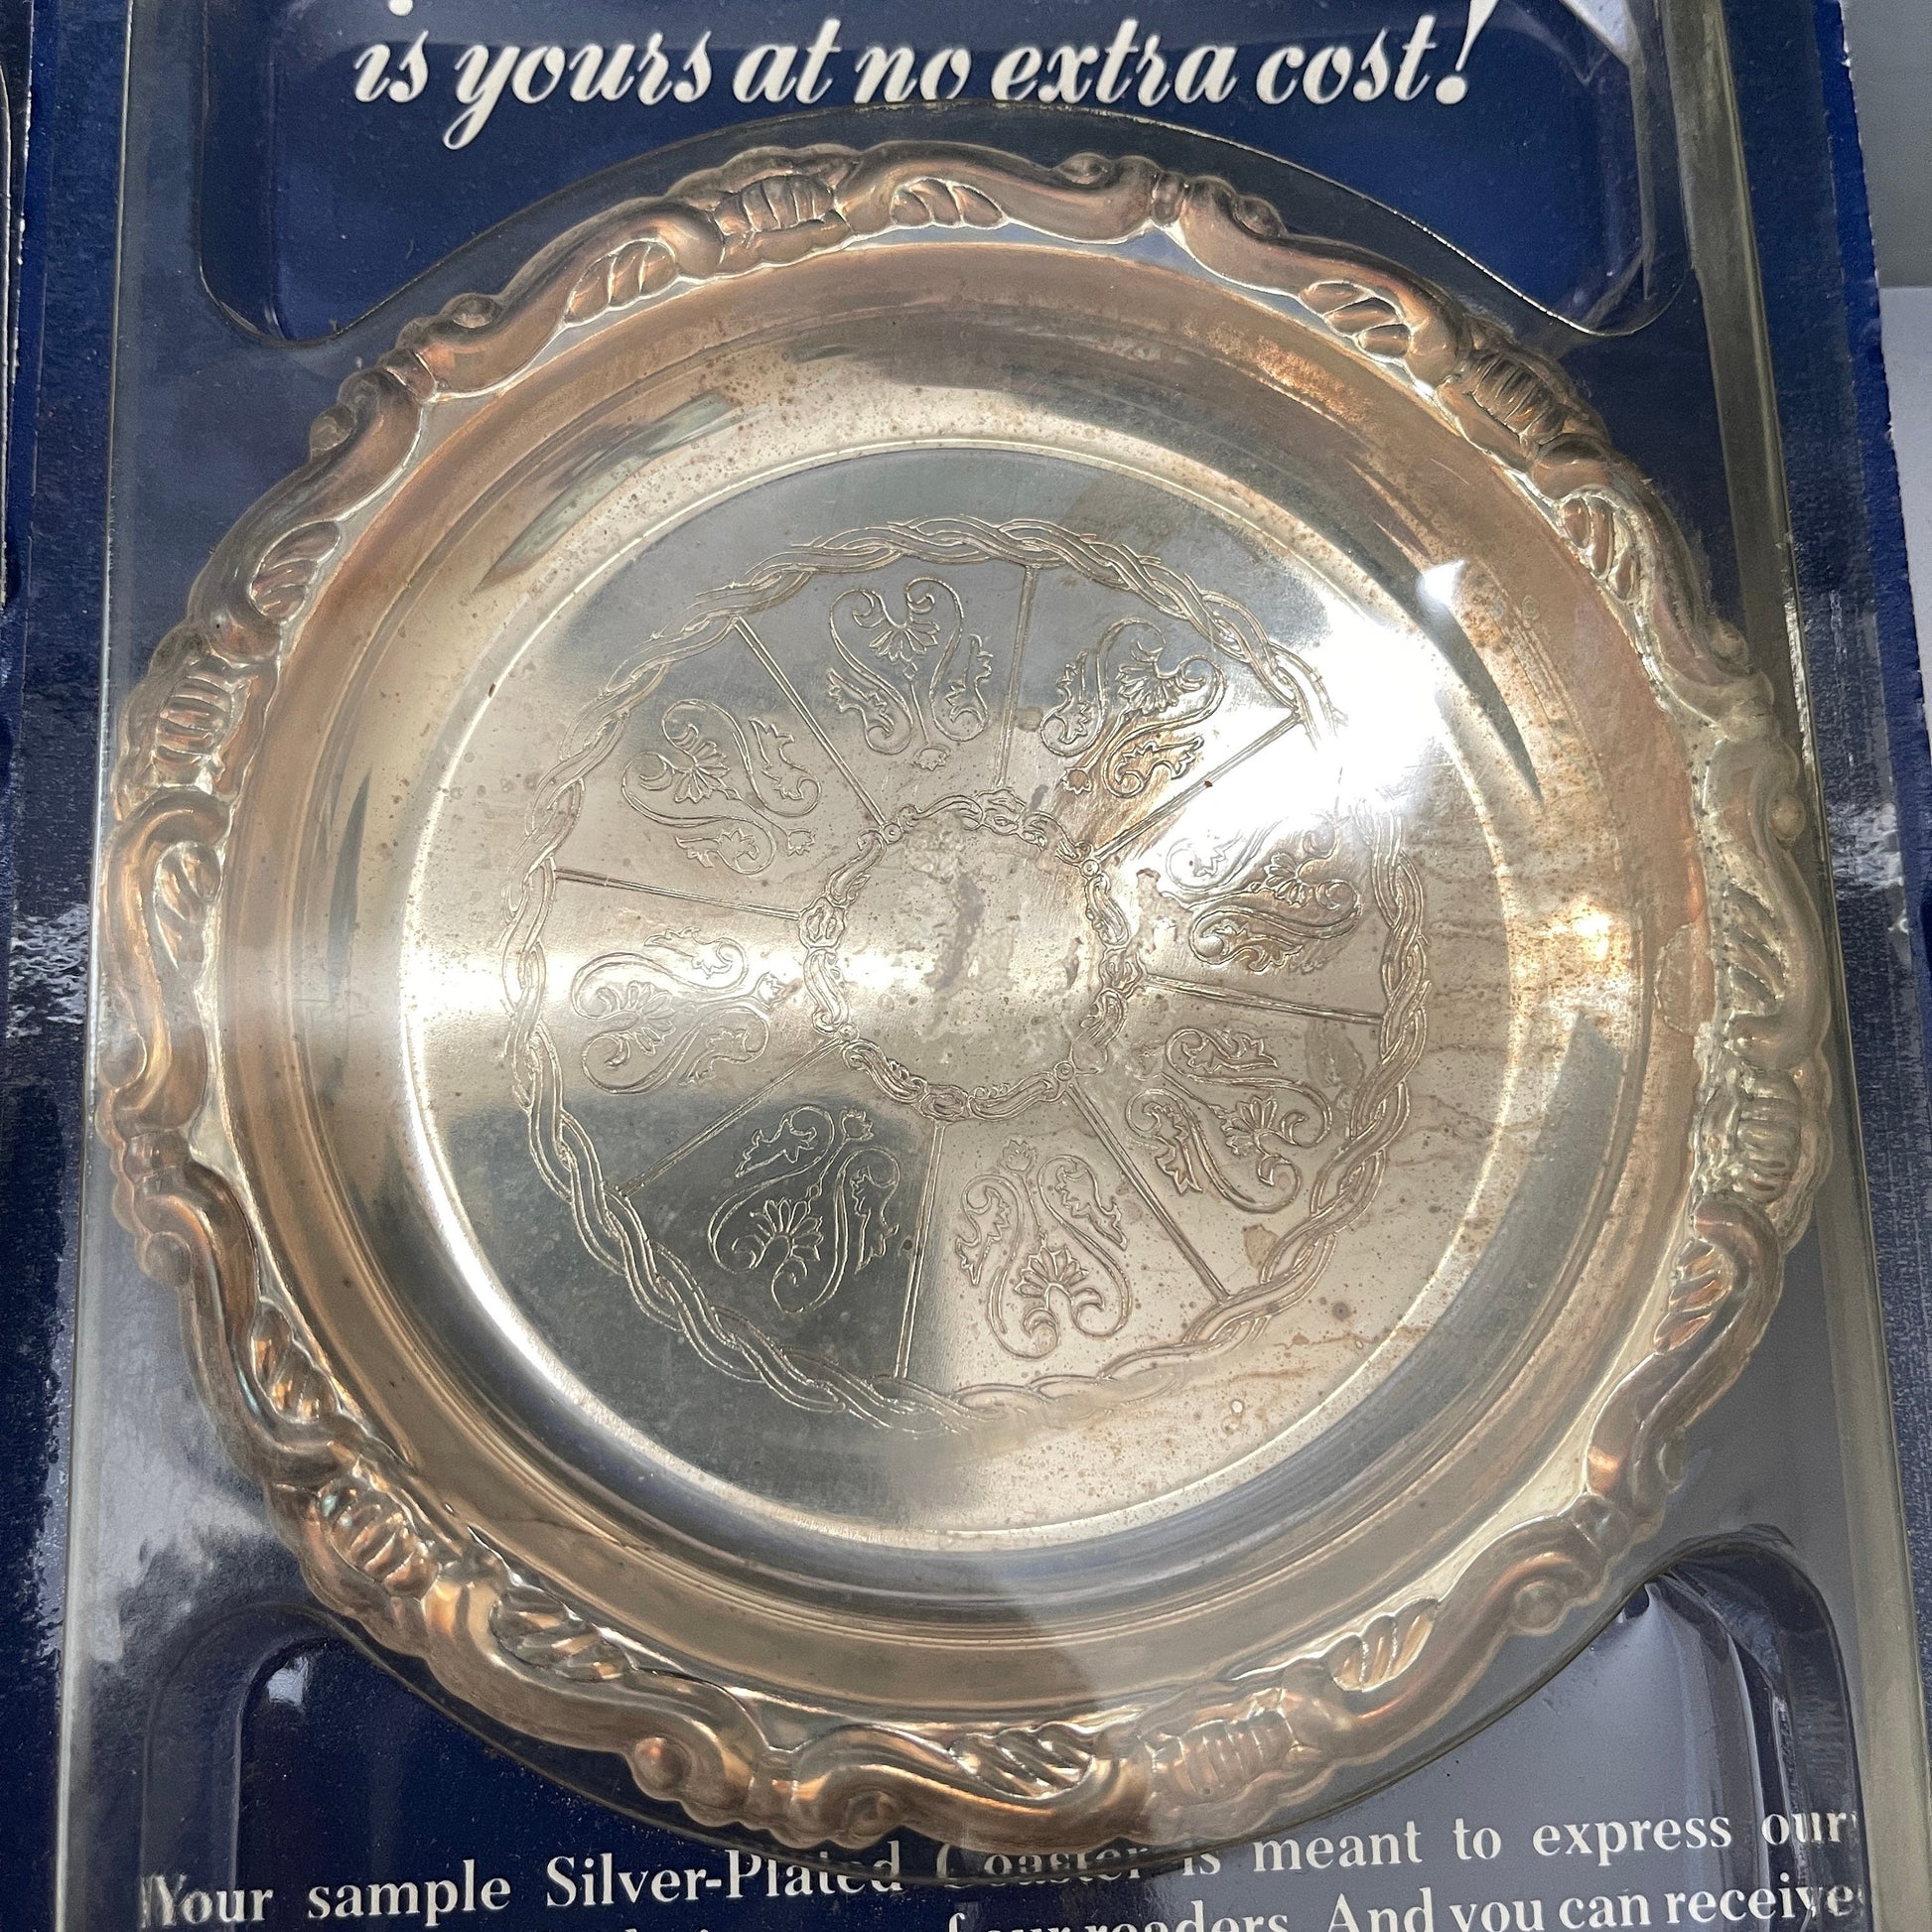 Readers Digest, Set Of 2, Silver Plated Coasters, Vintage, Advertising, Collectibles